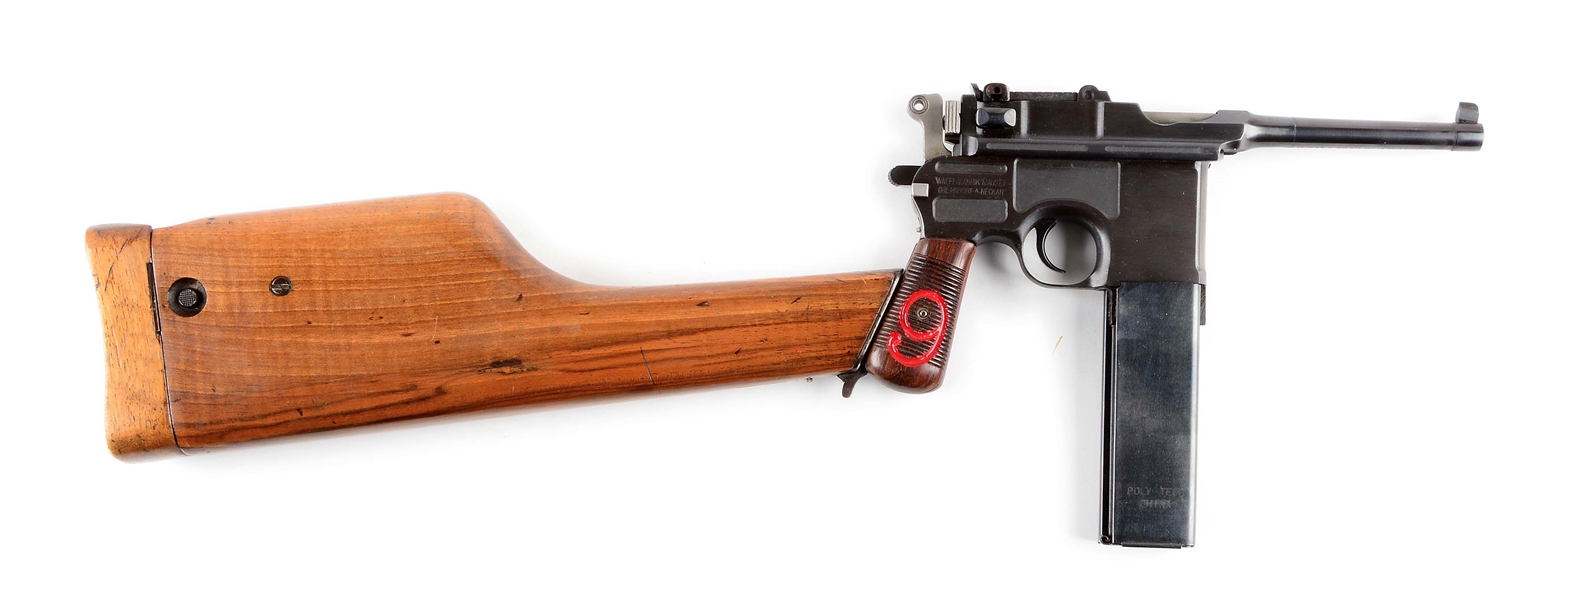 (C) REFURBISHED MAUSER C96 BOLO RED 9 SEMI-AUTOMATIC PISTOL WITH SHOULDER STOCK.